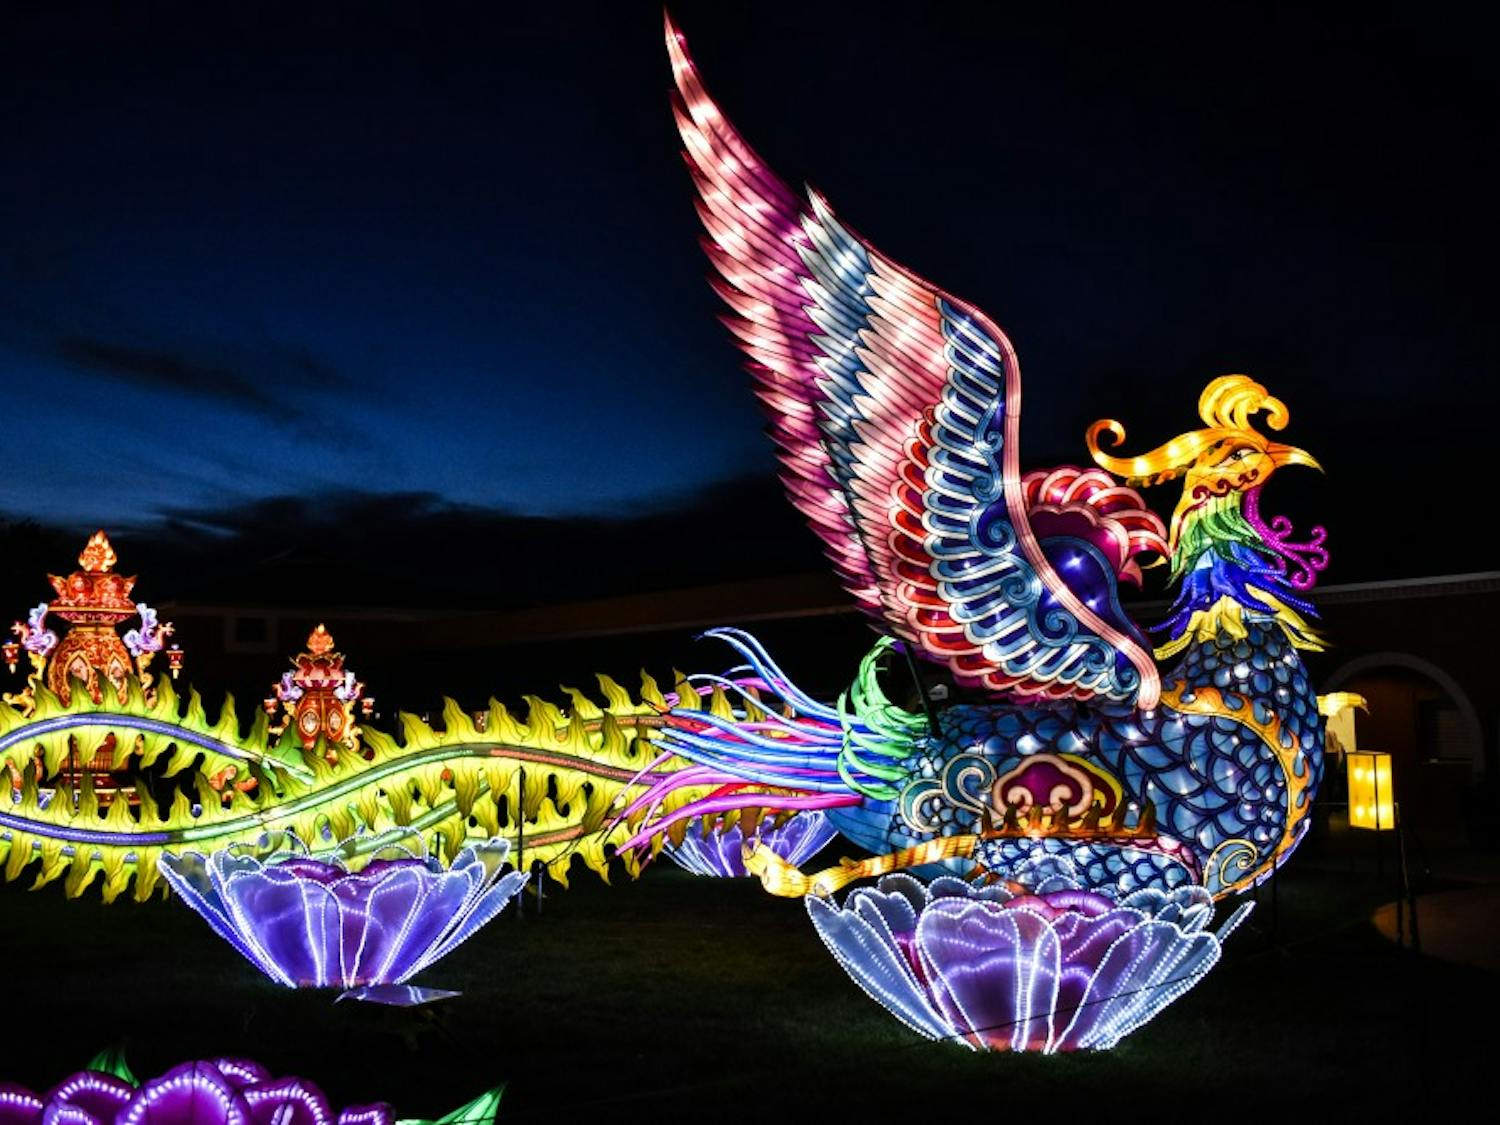 A lantern phoenix on display during the Dragon Lights Festival on Saturday, Oct. 6.